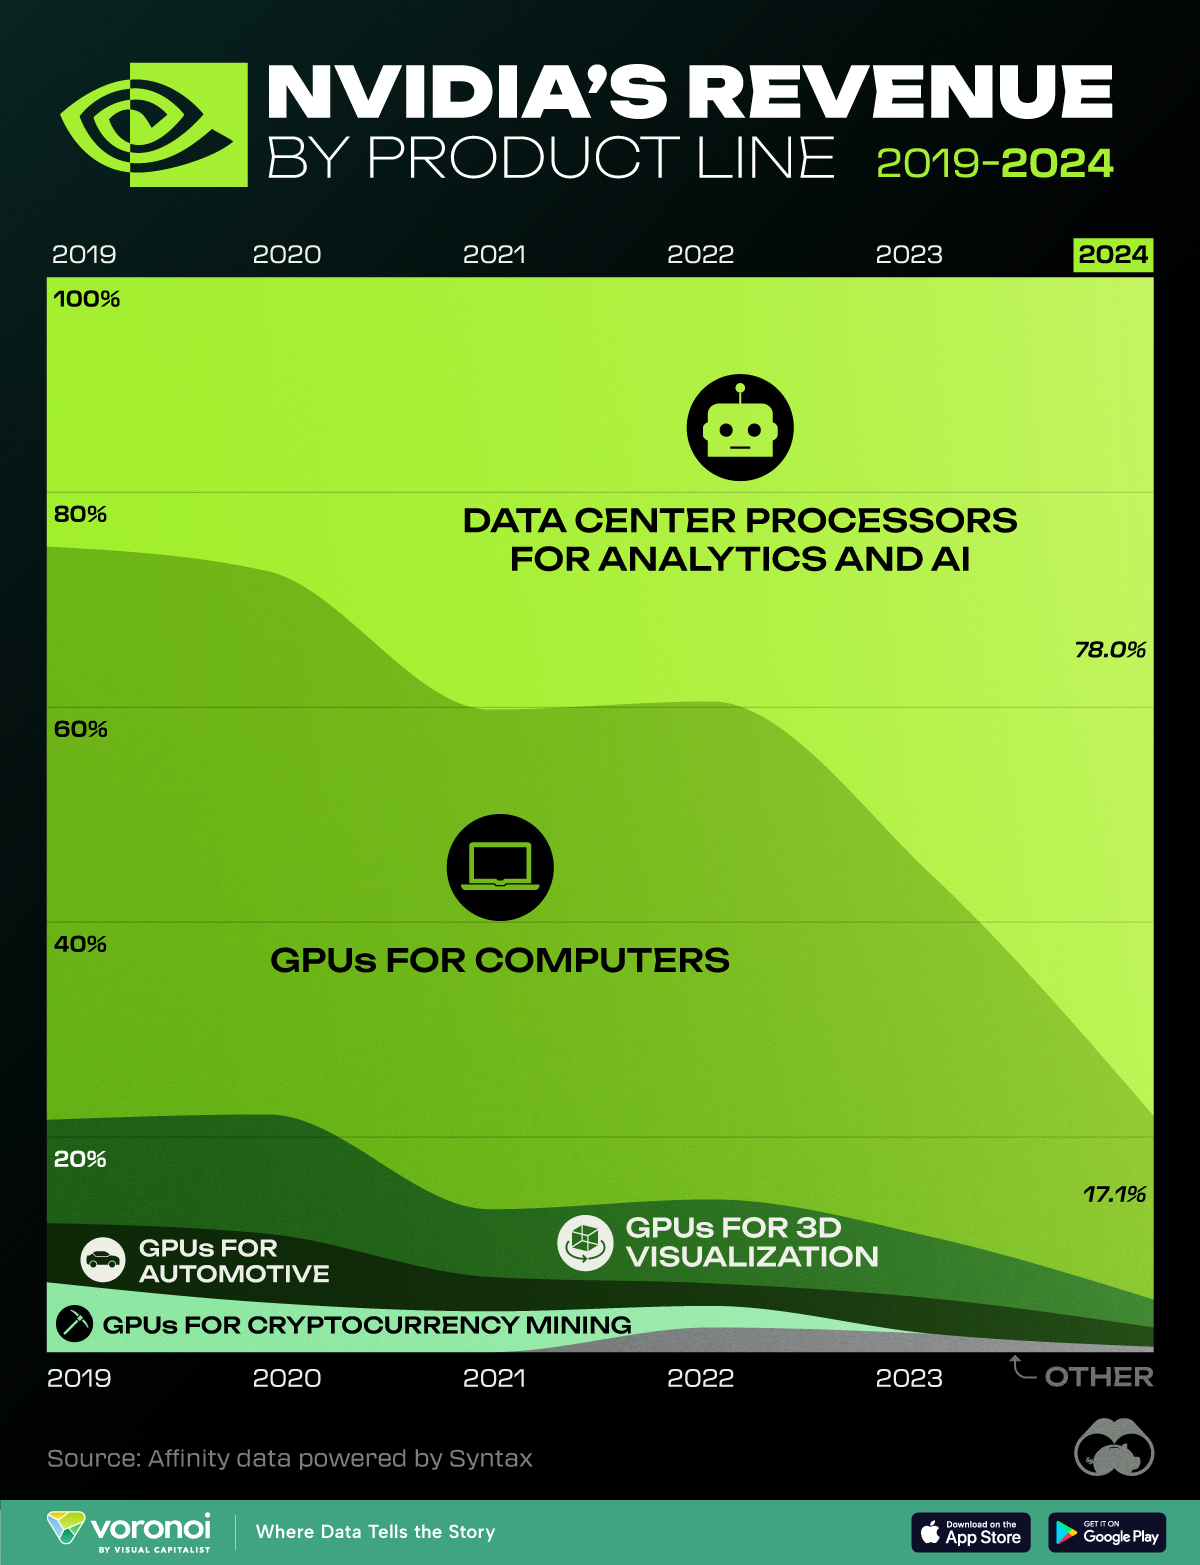 This area chart shows Nvidia's revenue by product segment between 2019 and 2024.